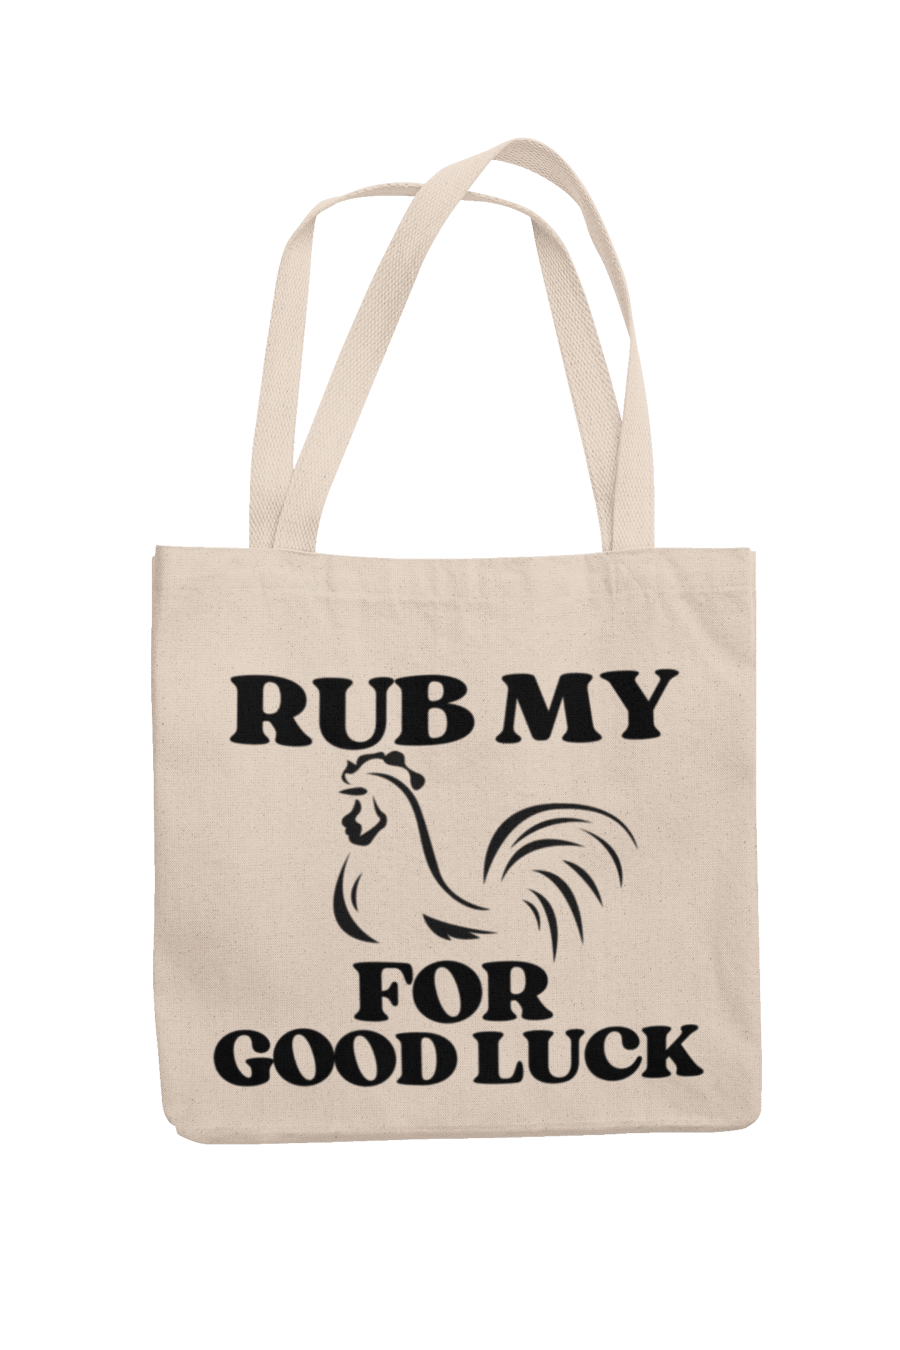 Funny Rude Tote Bag - Rub My .. For Good Luck